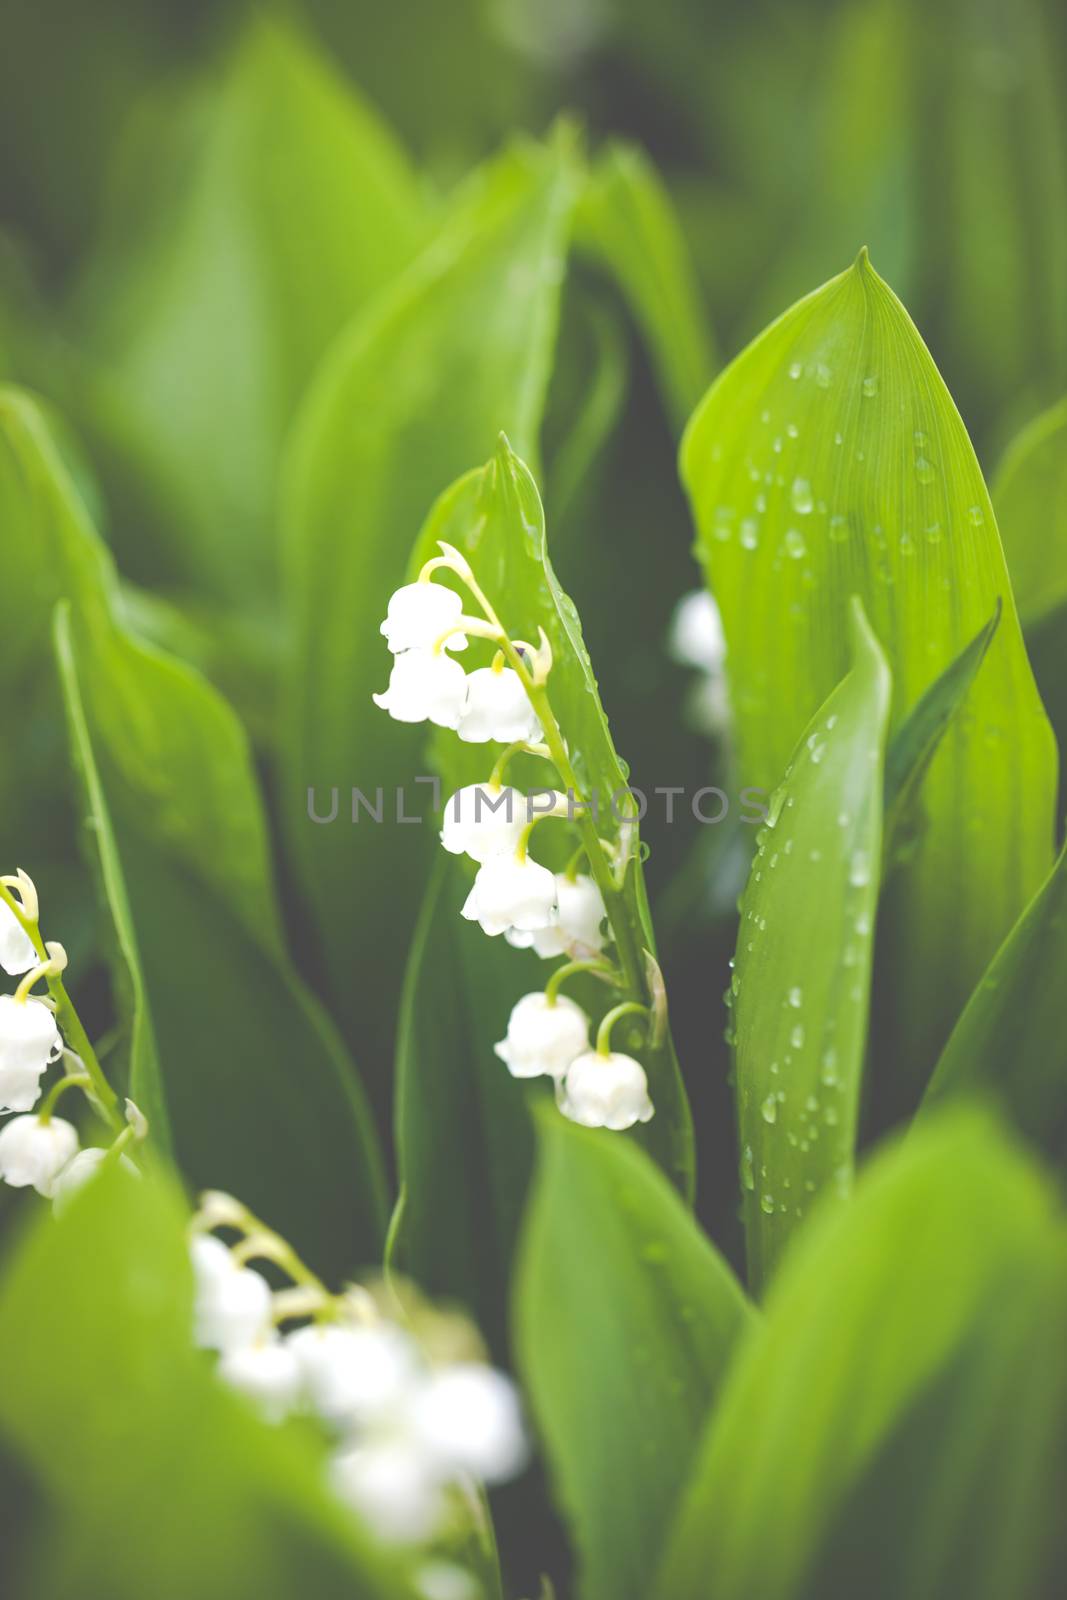 Lily of the valley flowers with water drops on green background. Convallaria majalis 